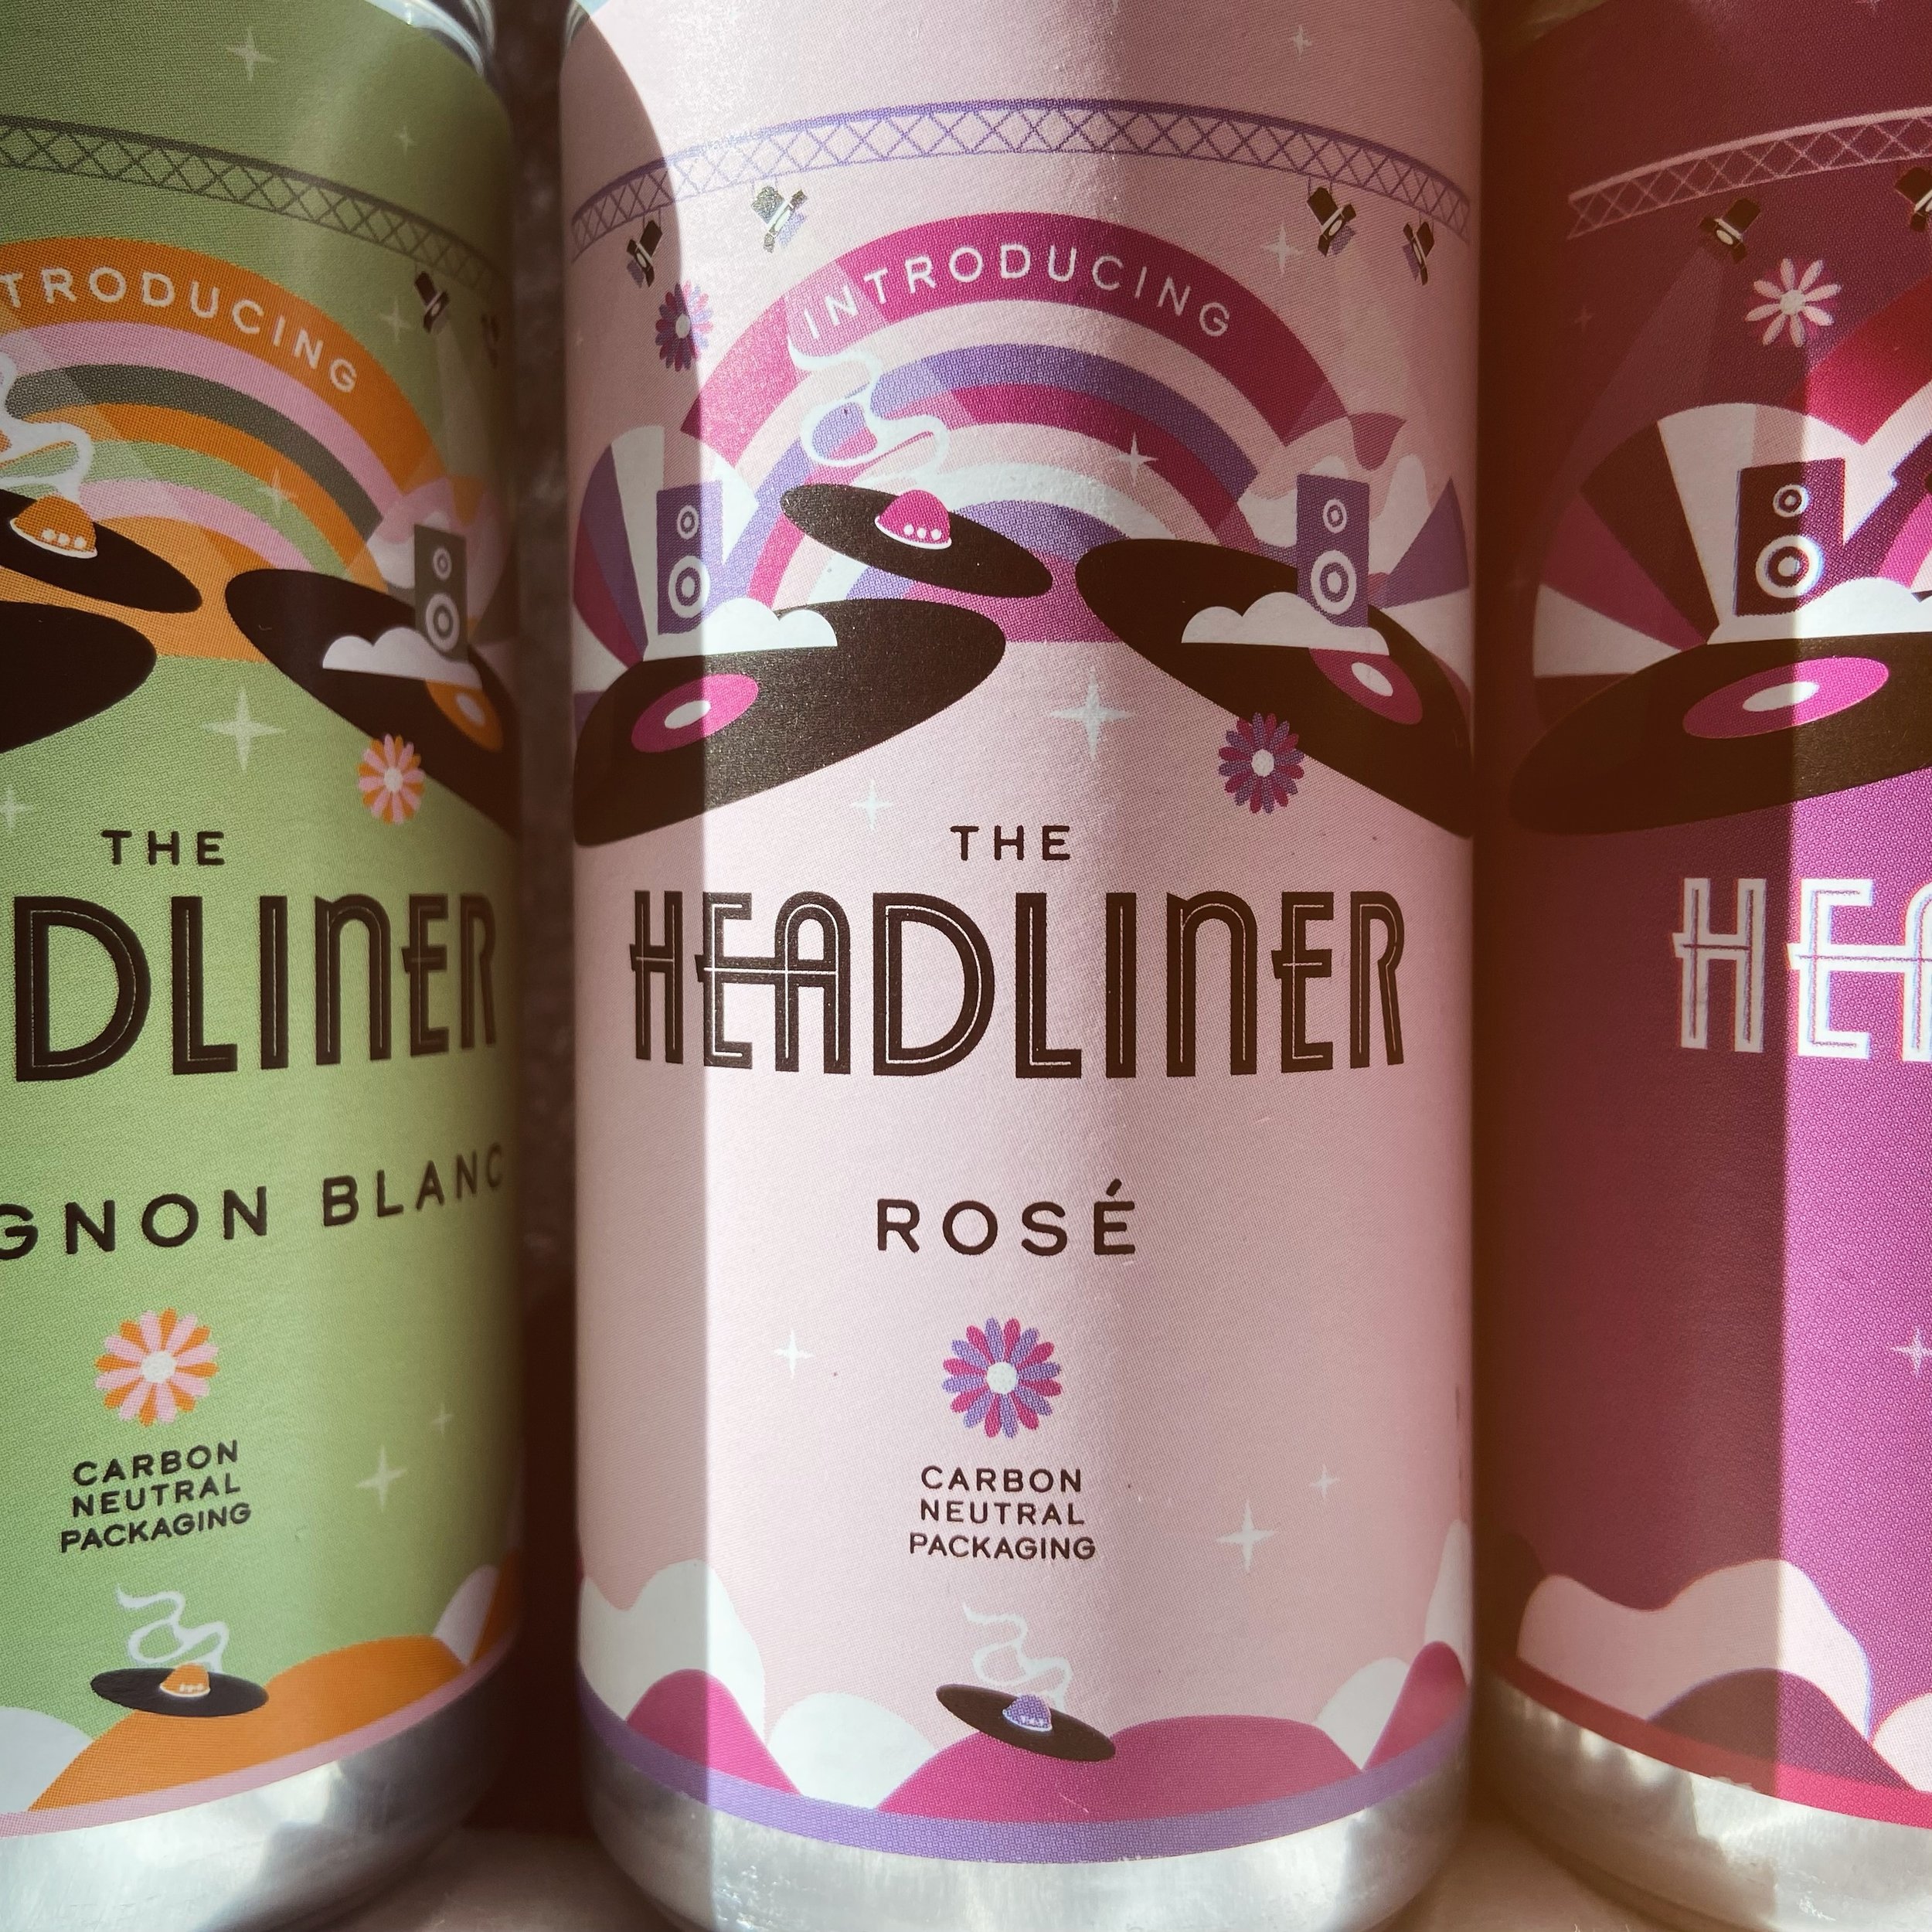 The ultimate event line-up! The Headliner in aluminium cans. 💚🩷💜

Get in touch with us to stock these at your event bar! info@eventwinesolutions.co.uk

#cannedwine #sustainable #wine #events #theheadliner